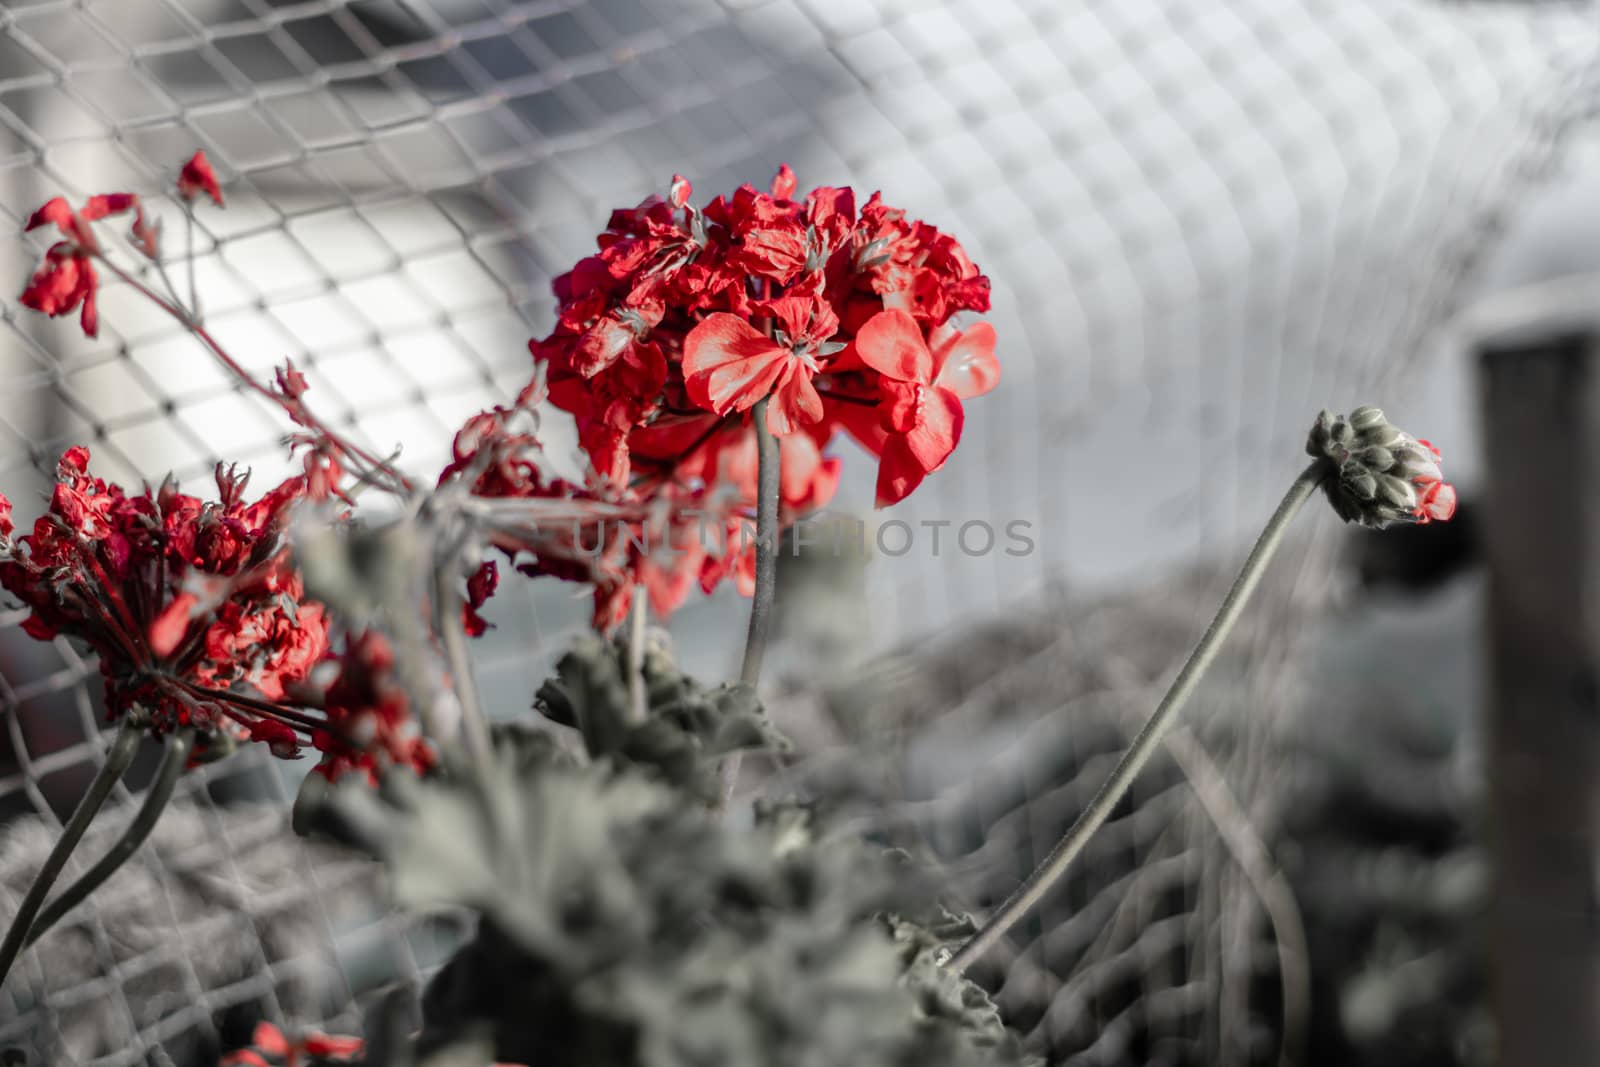 a black and white closeup shoot to red flower - background is gray. photo has taken from izmir/turkey.